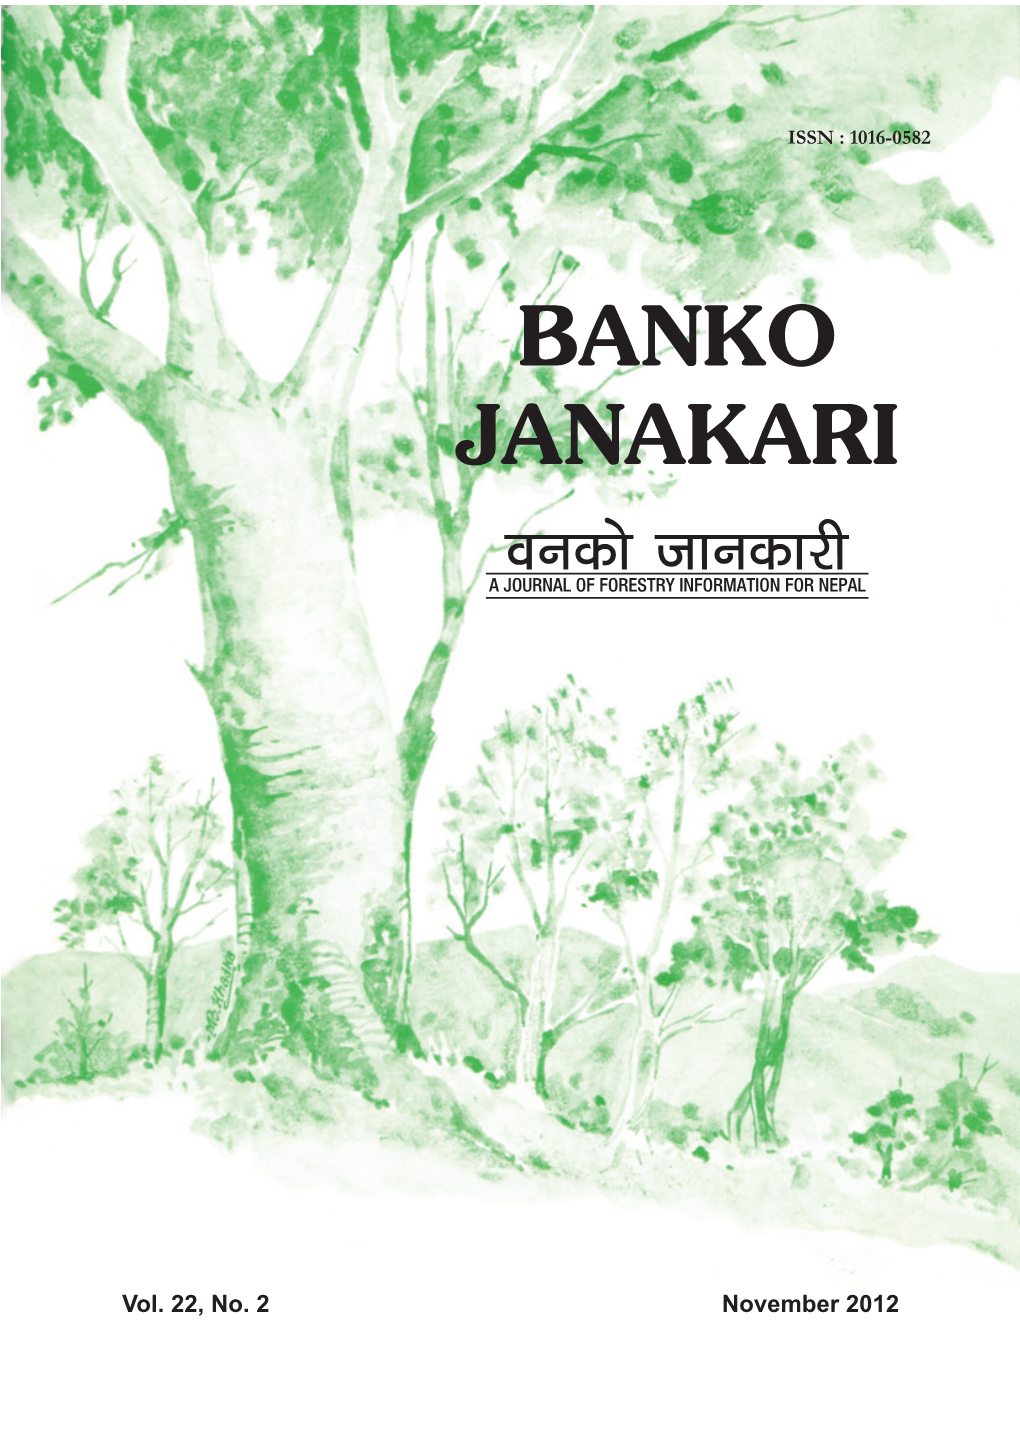 BANKO JANAKARI Jgsf] Hfgsf/L a JOURNAL of FORESTRY INFORMATION for NEPAL